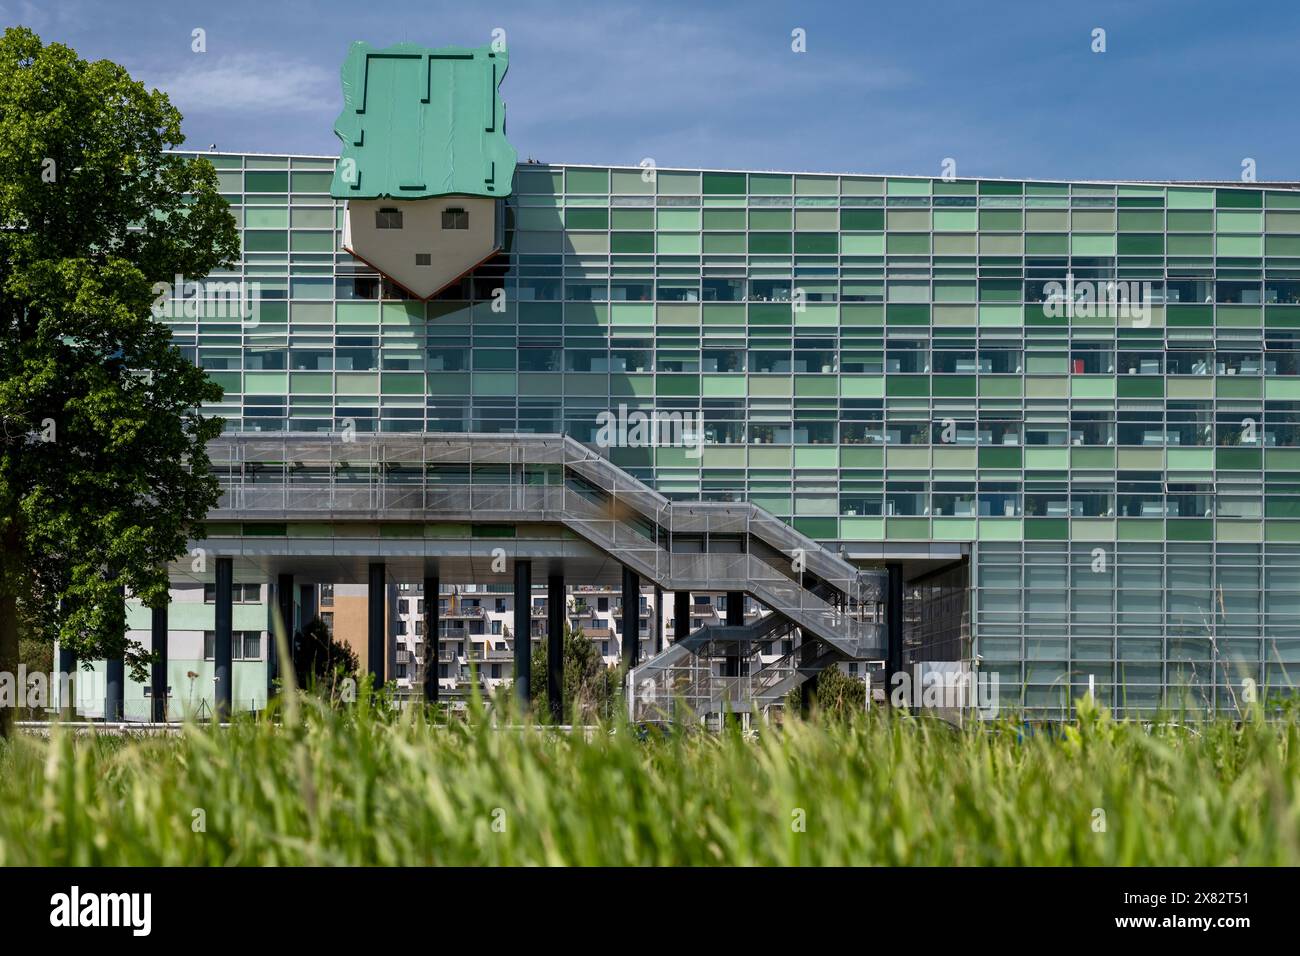 House Attack, Erwin Wurm, Bratislava, Slovaquie Banque D'Images